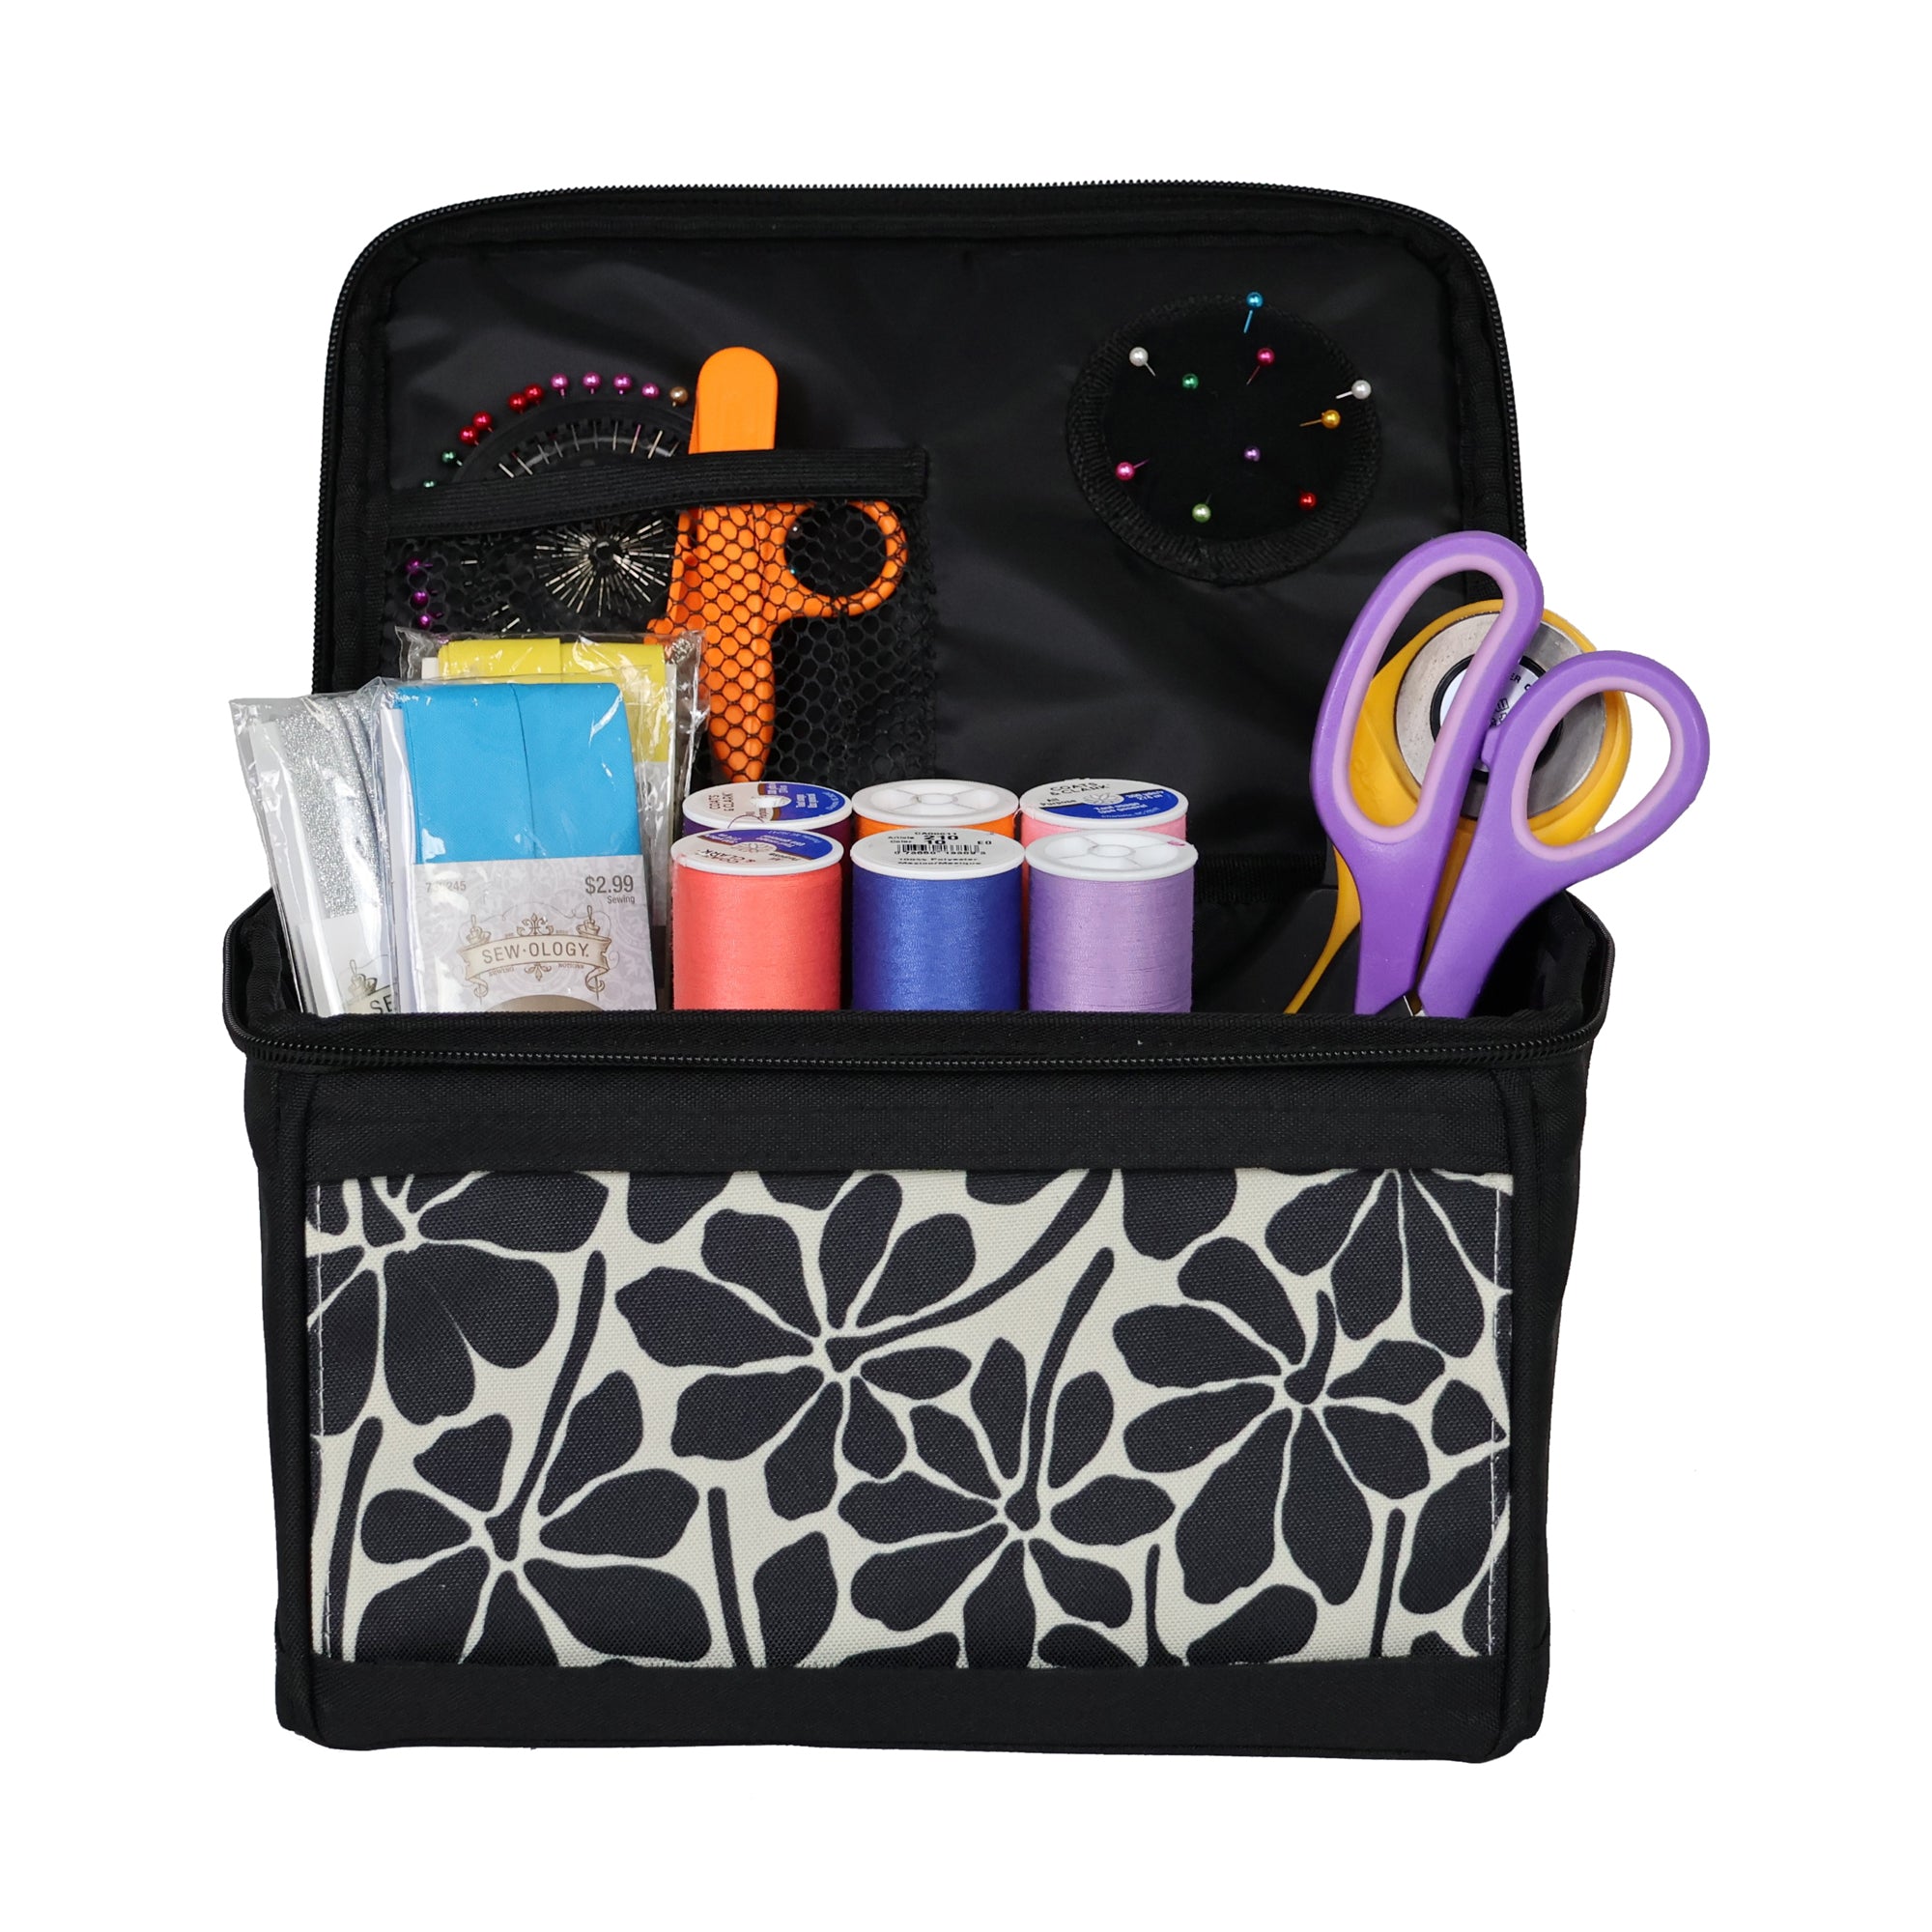 Everything Mary Sewing Kit Organizer Box, Black Floral - Supplies Stor